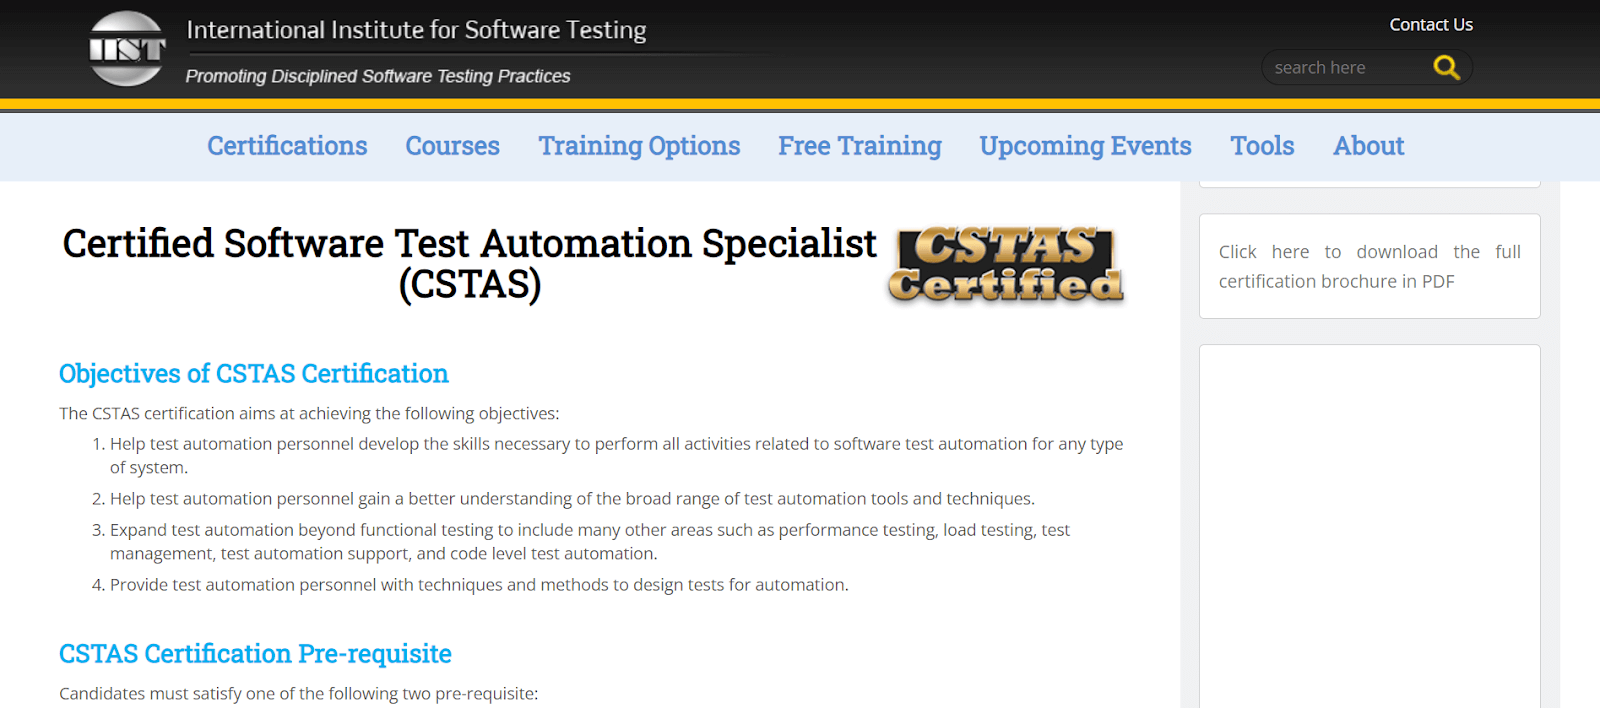 Certified Software Test Automation Specialist